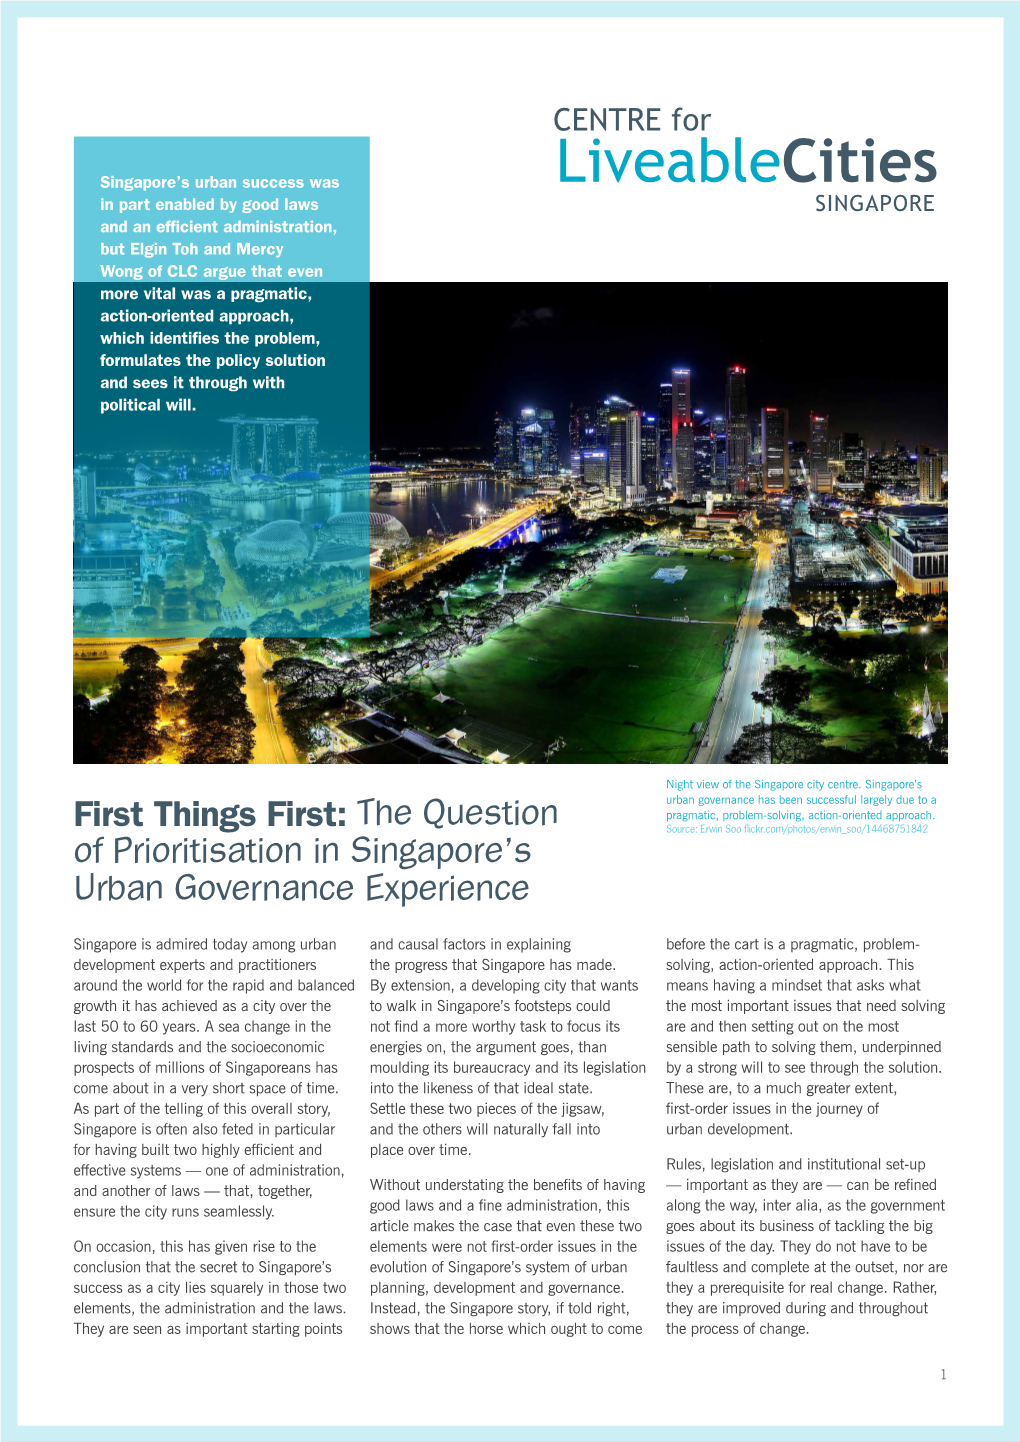 The Question of Prioritisation in Singapore's Urban Governance